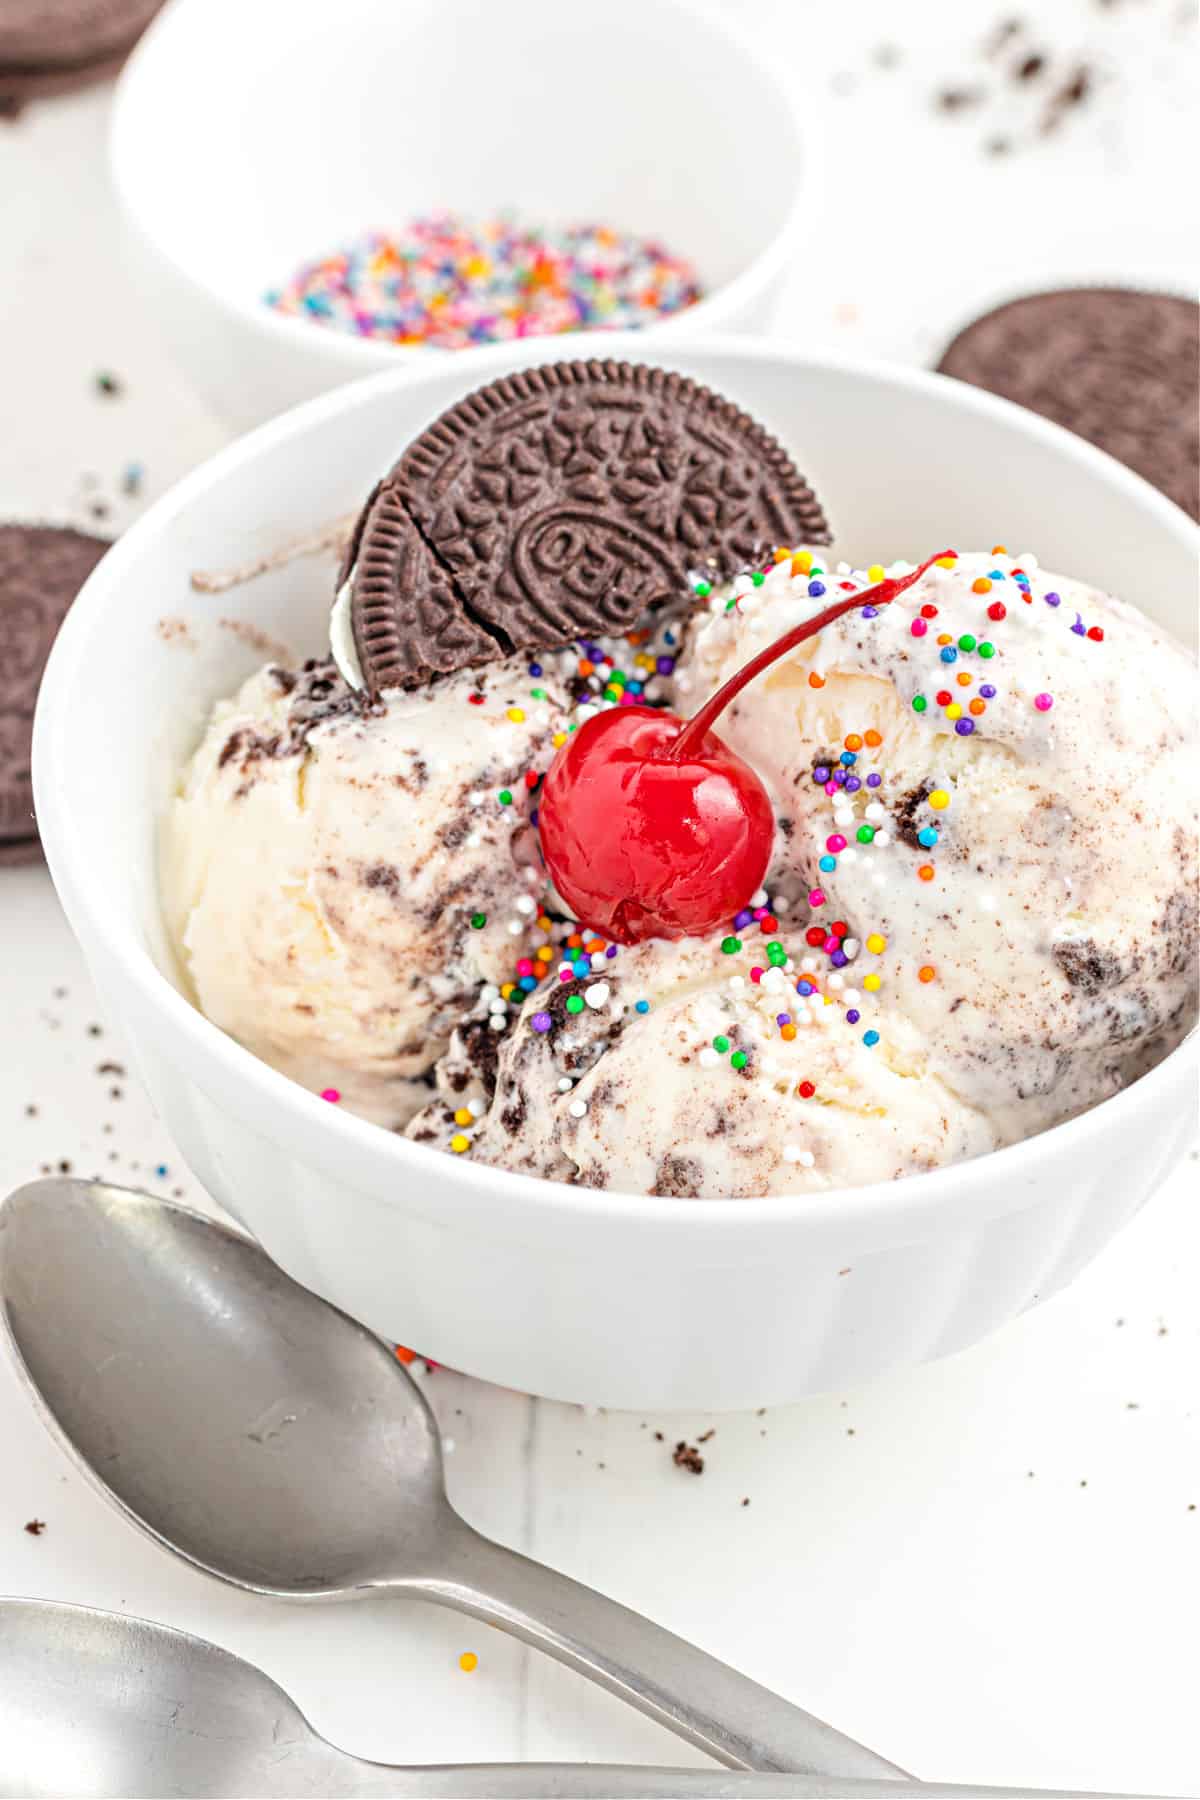 Oreo ice cream sundae in a white bowl with sprinkles and cherry.